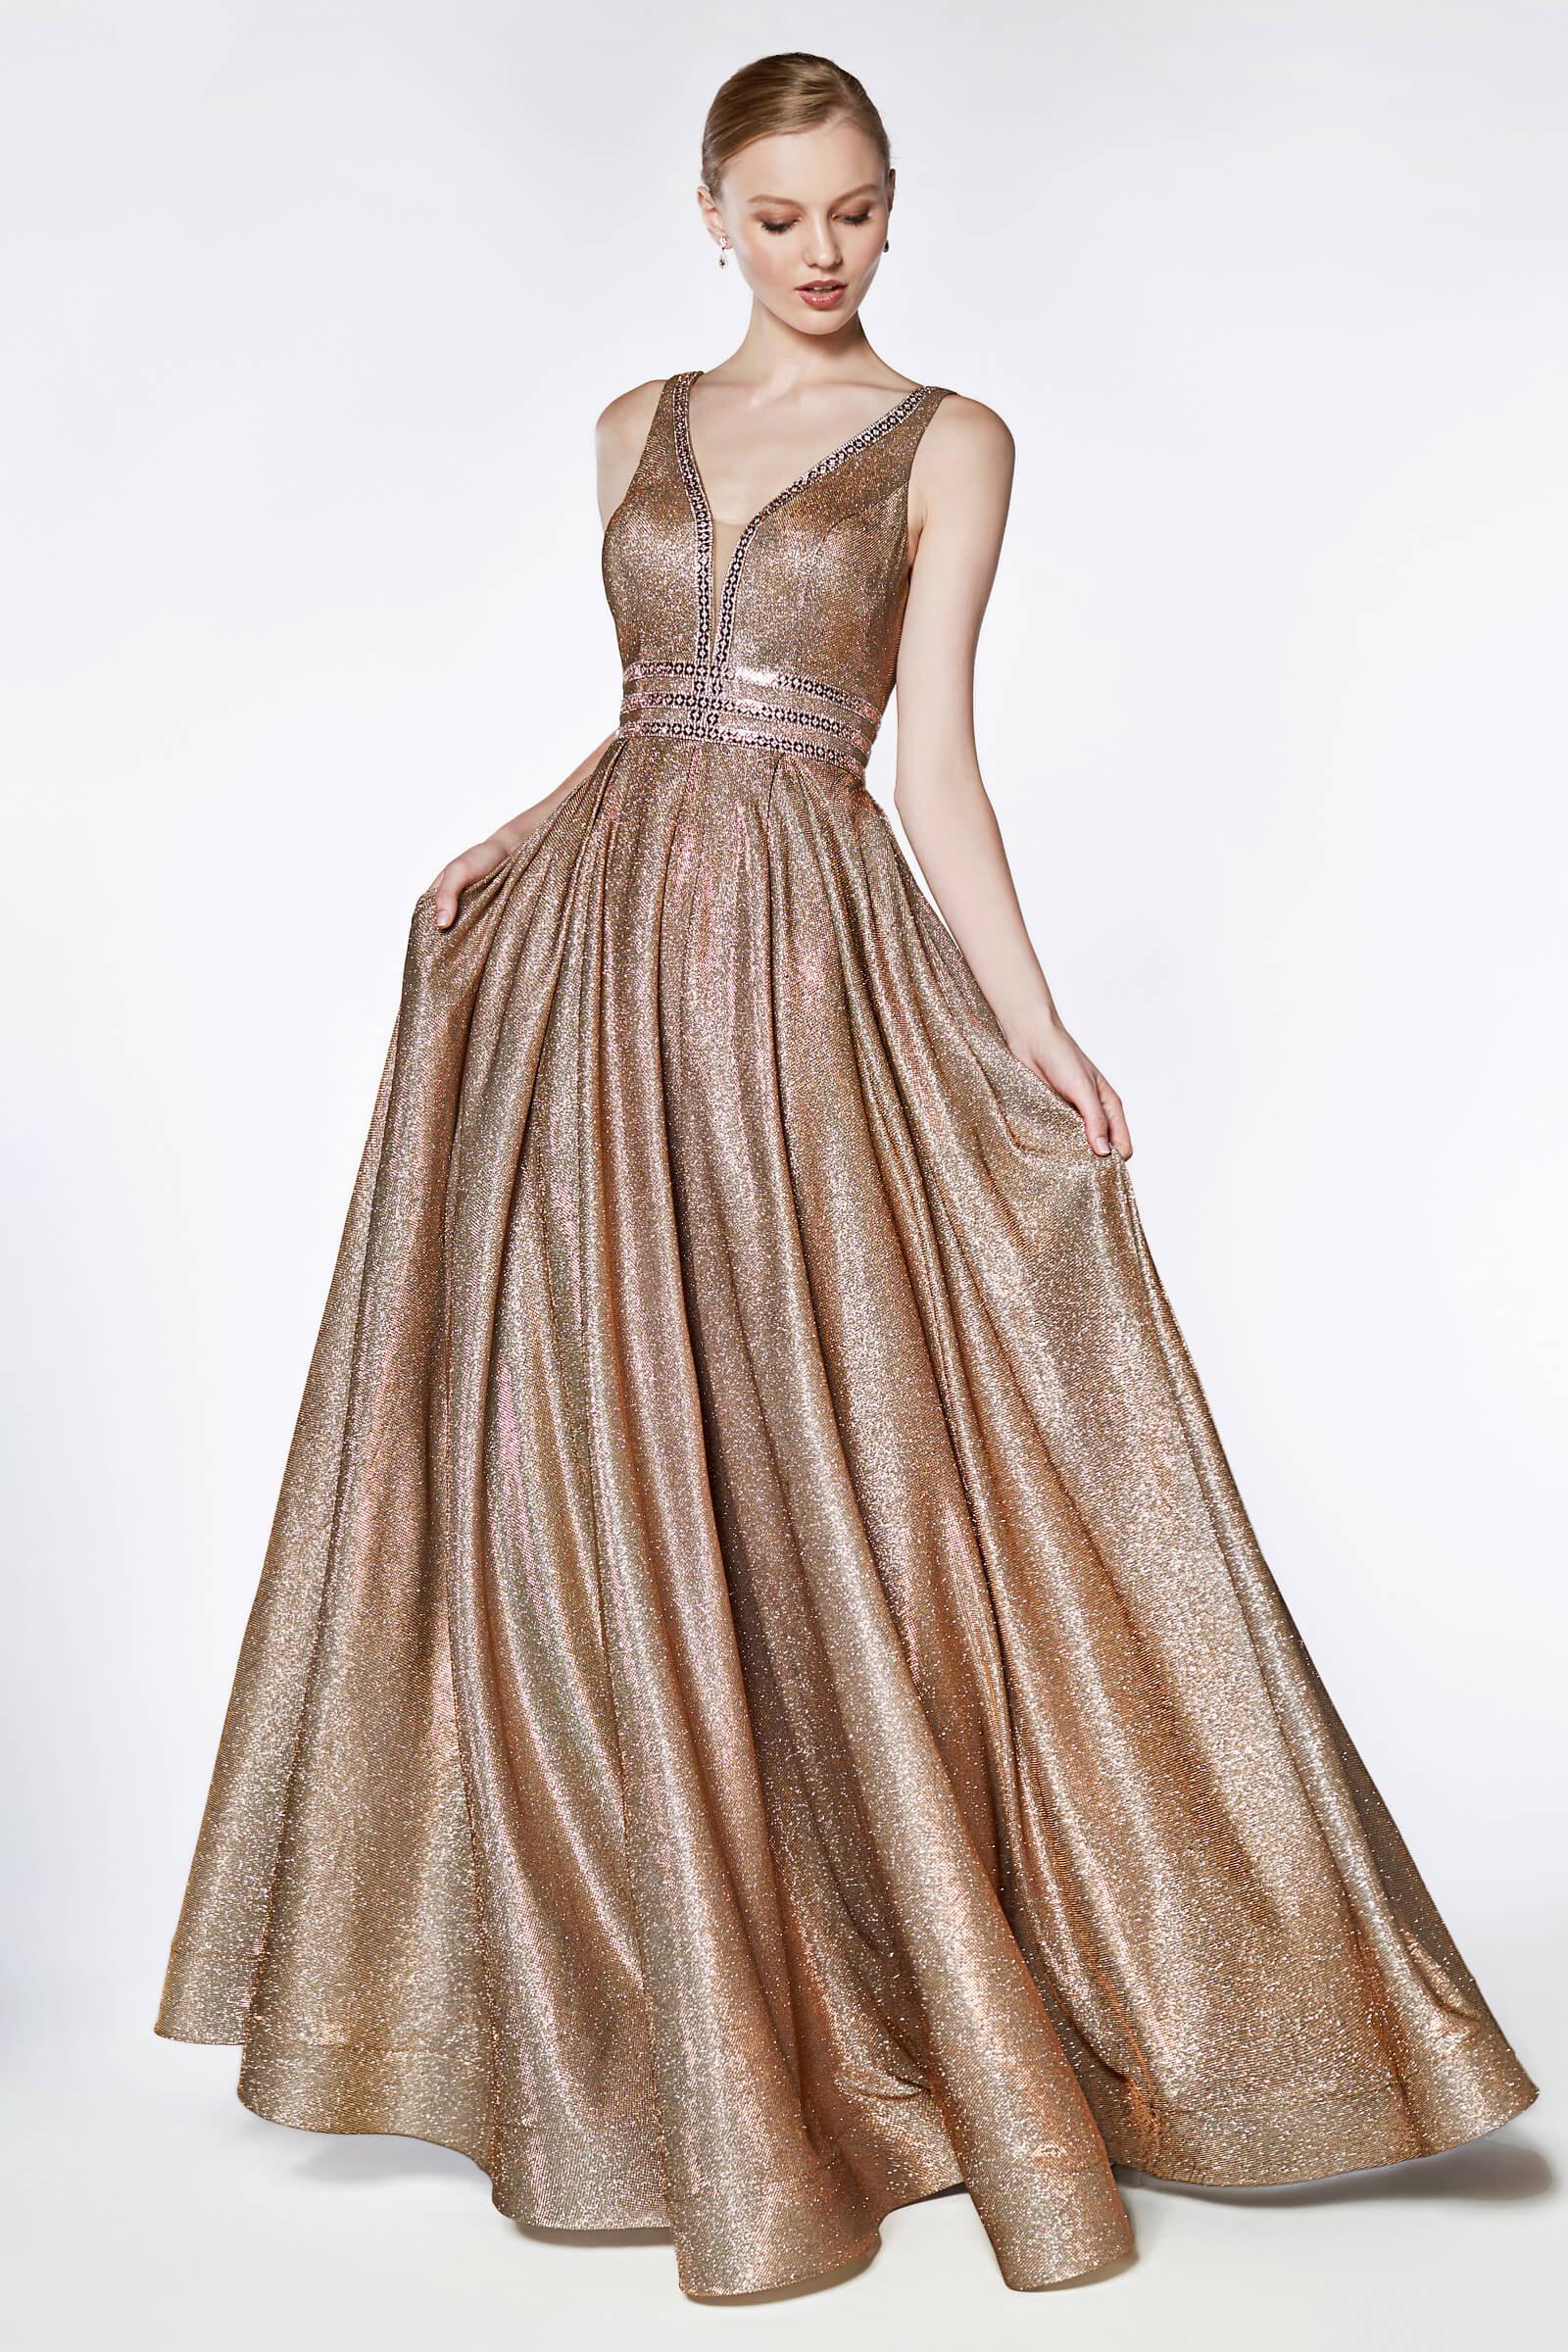 Long Metallic Formal Prom Dress Ball Gown - The Dress Outlet Cinderella Divine